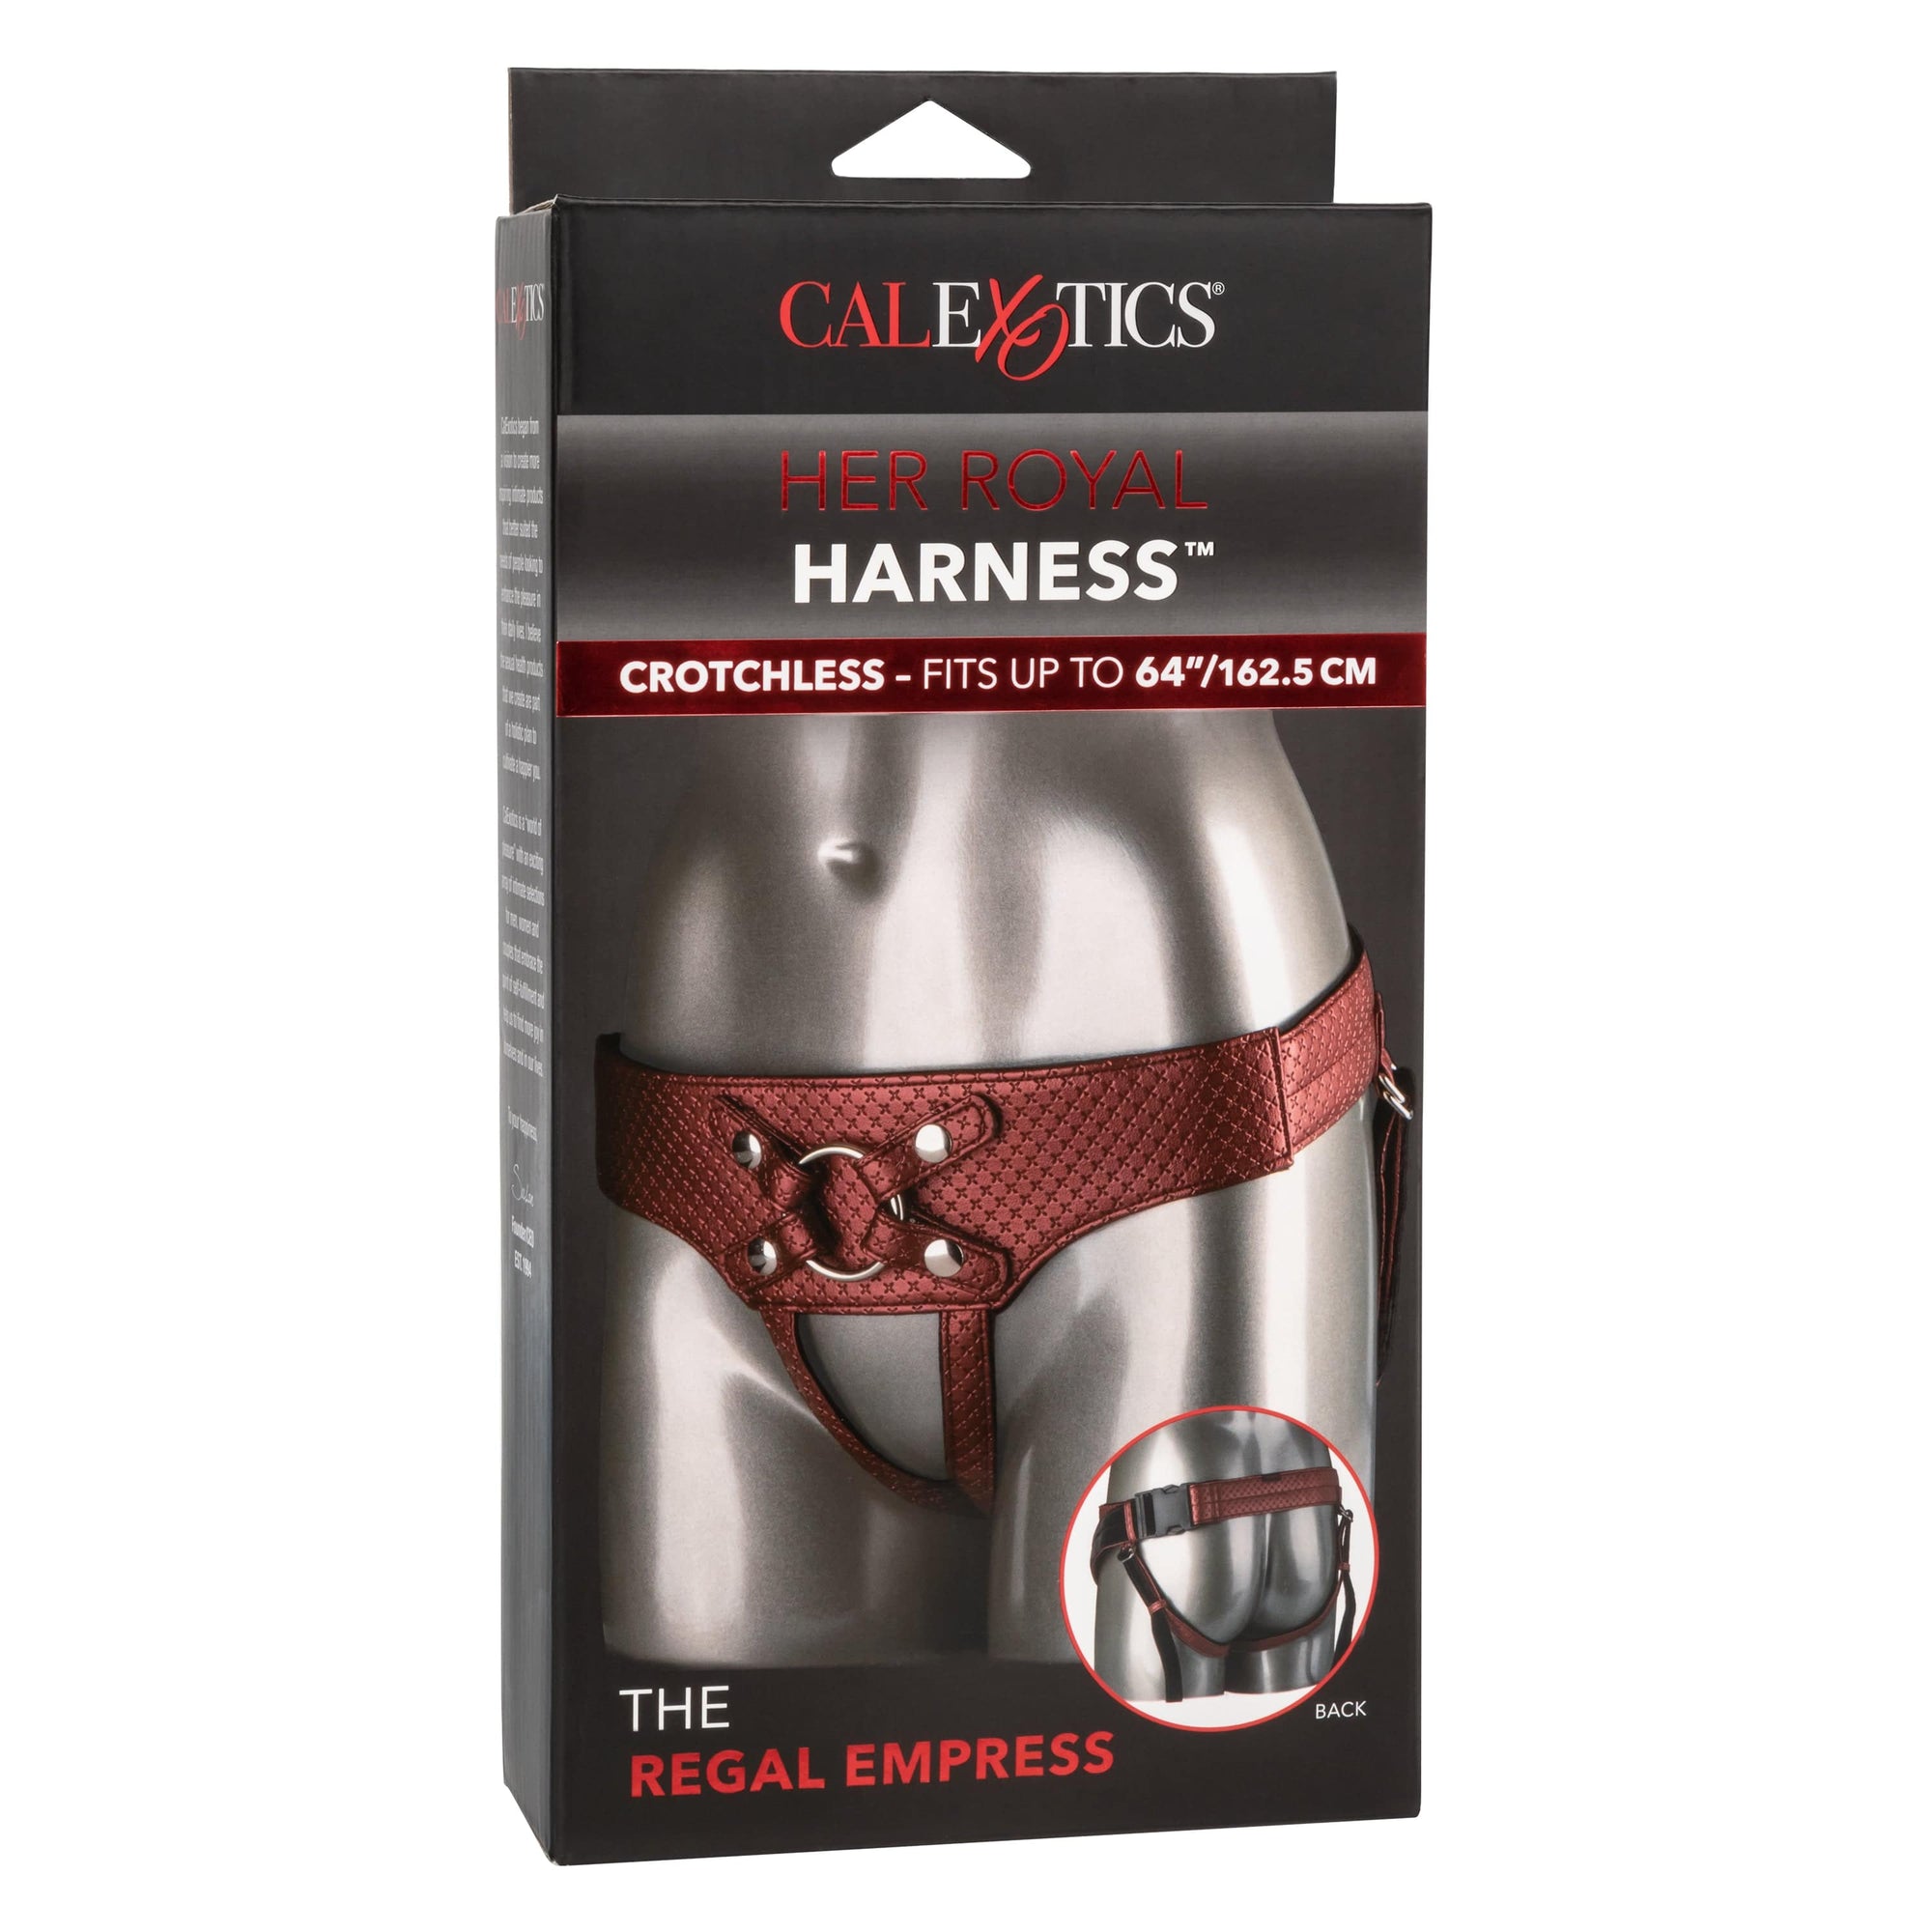 California Exotics - Her Royal Harness The Regal Empress Crotchless Strap On (Bronze) Strap On w/o Dildo 716770092069 CherryAffairs